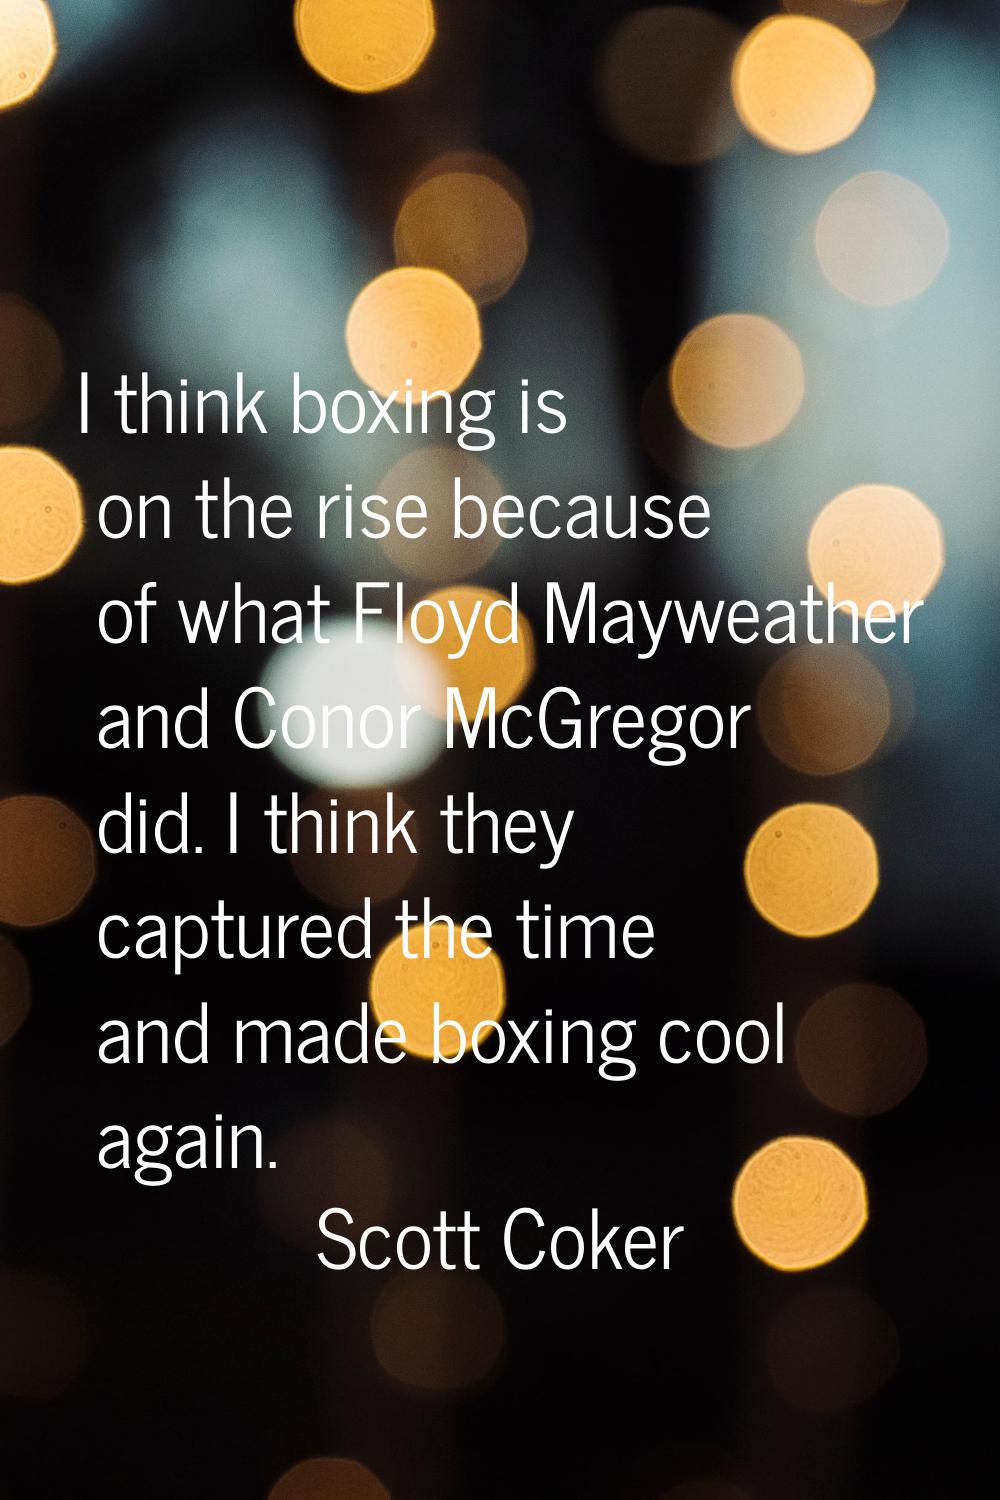 I think boxing is on the rise because of what Floyd Mayweather and Conor McGregor did. I think they